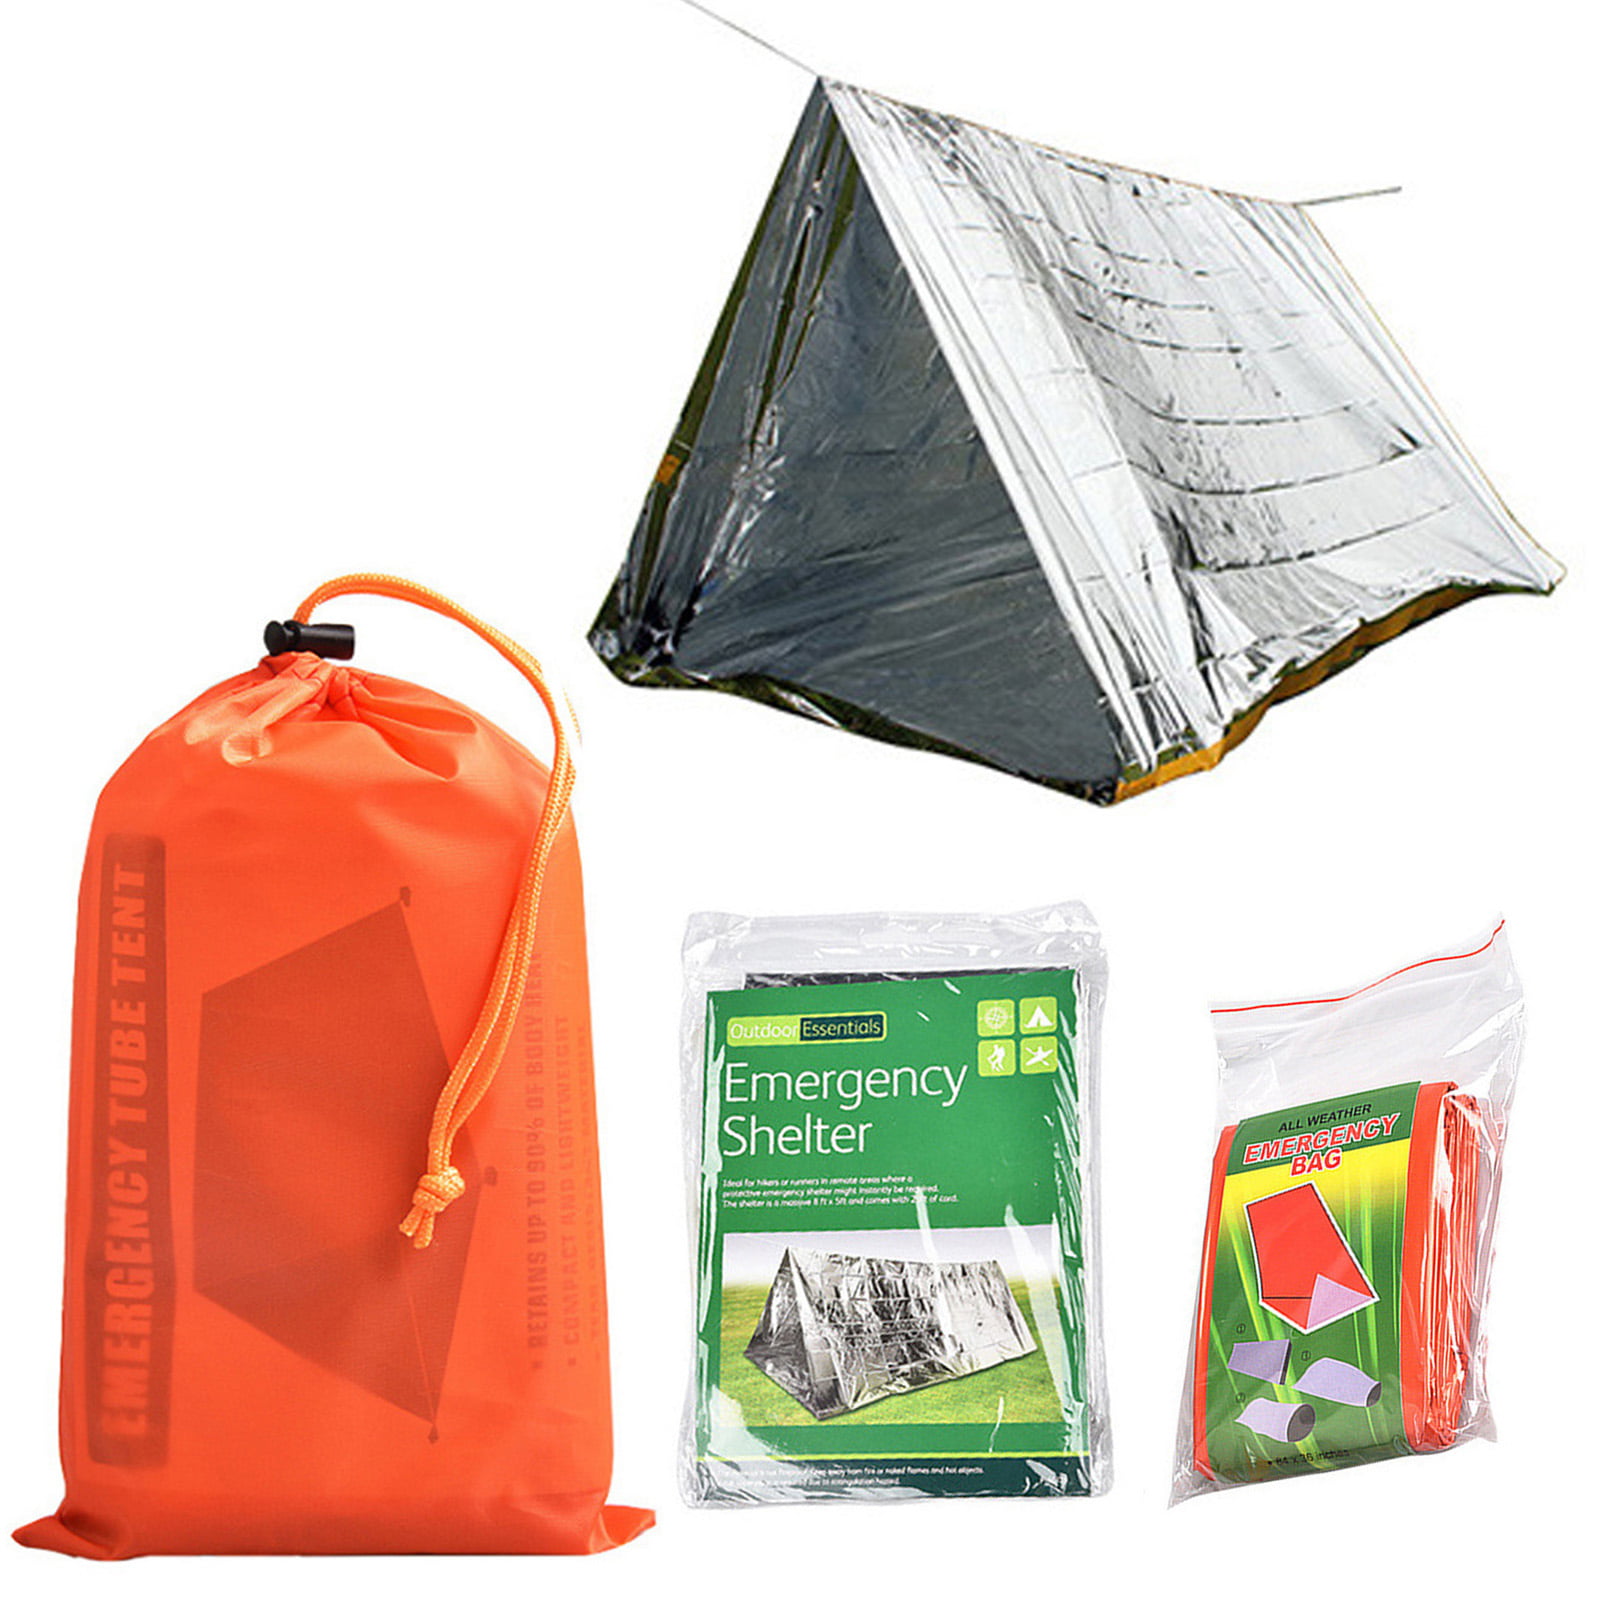 Life Tent Emergency Survival Shelter 2Person Emergency Tent Use As Survival Tent 